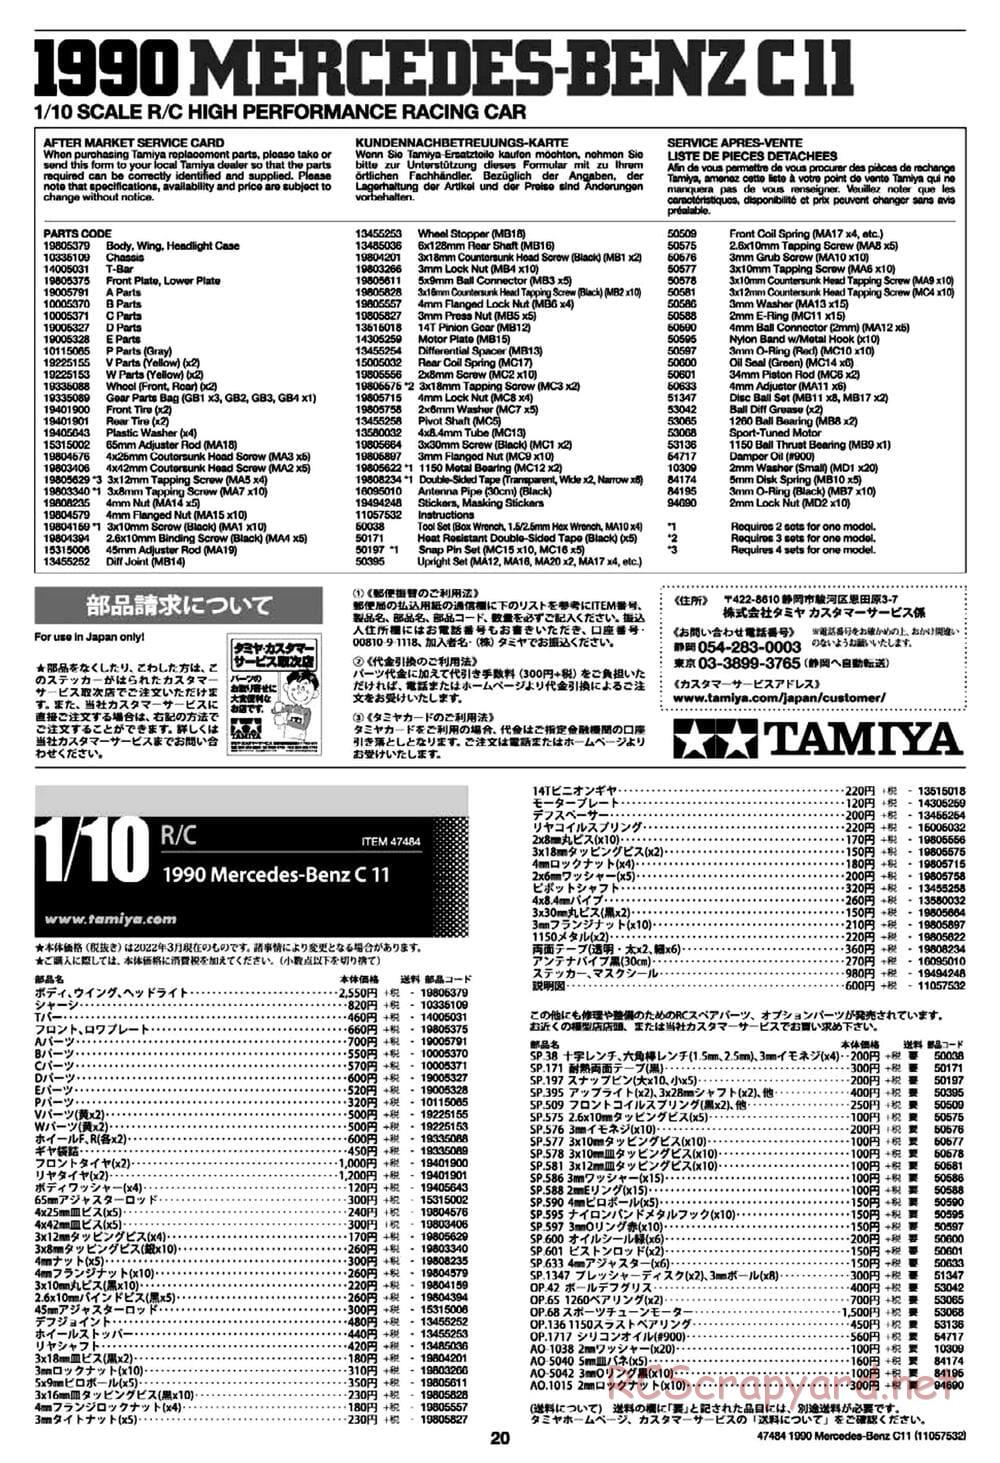 Tamiya - 1990 Mercedes-Benz C11 - Group-C Chassis - Manual - Page 20